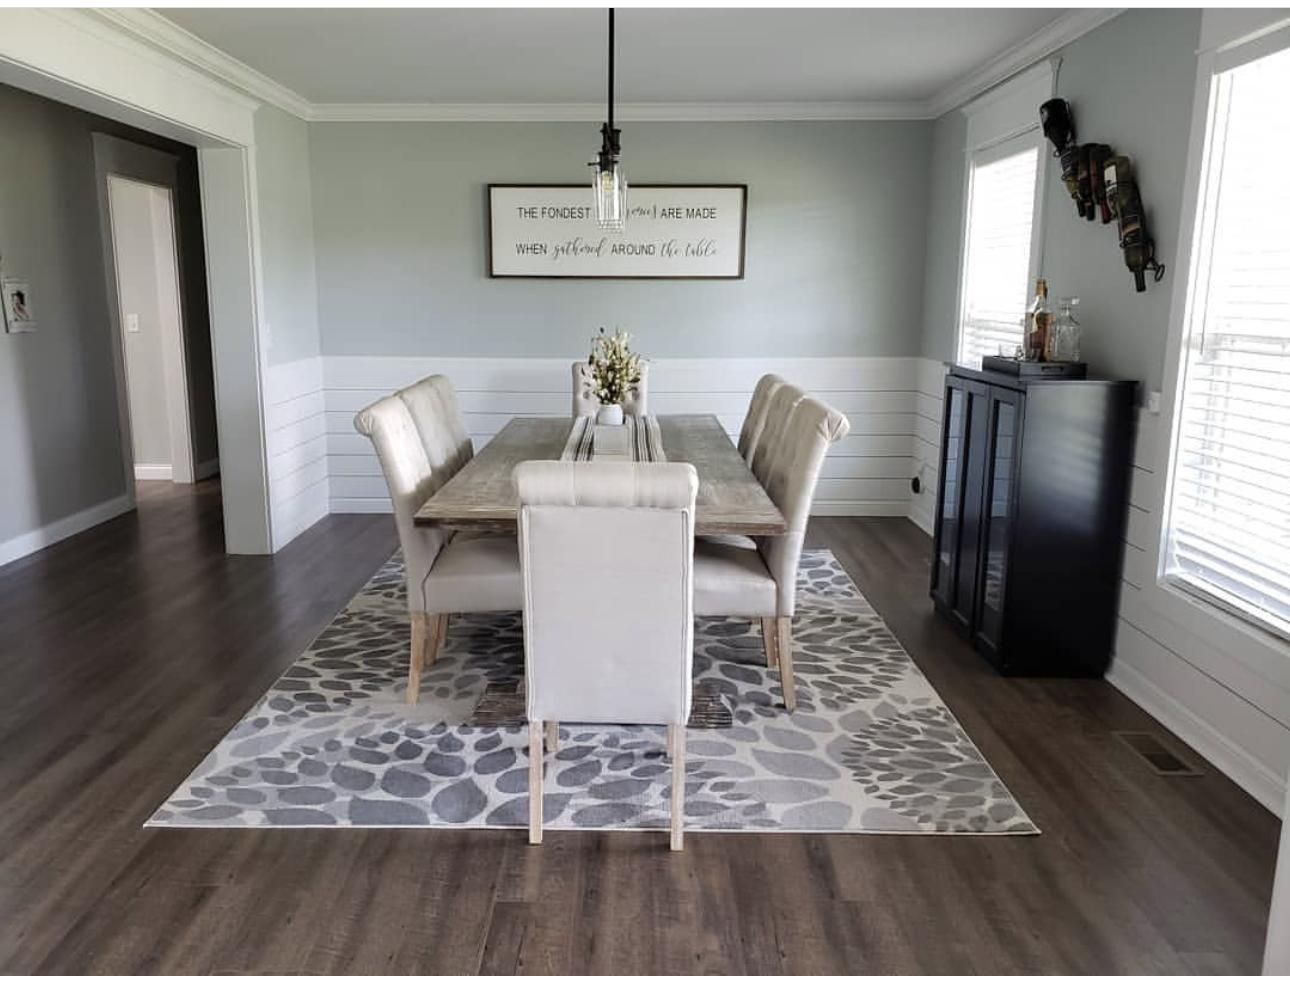 (No more boring dining rooms with Sherwin Williams Silver Strand accent walls)